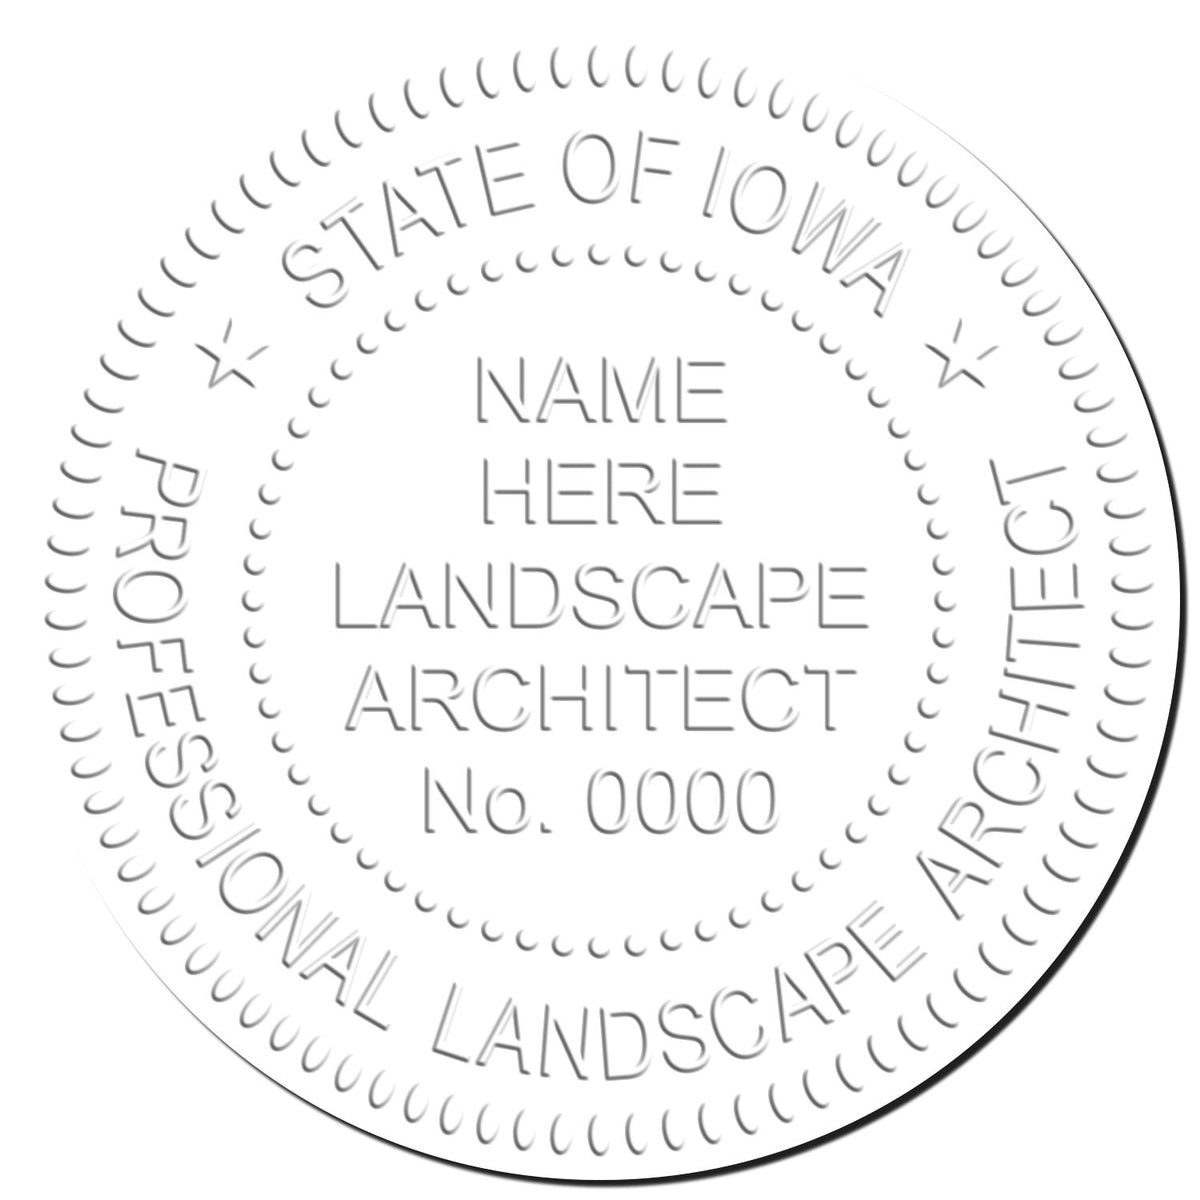 This paper is stamped with a sample imprint of the Soft Pocket Iowa Landscape Architect Embosser, signifying its quality and reliability.